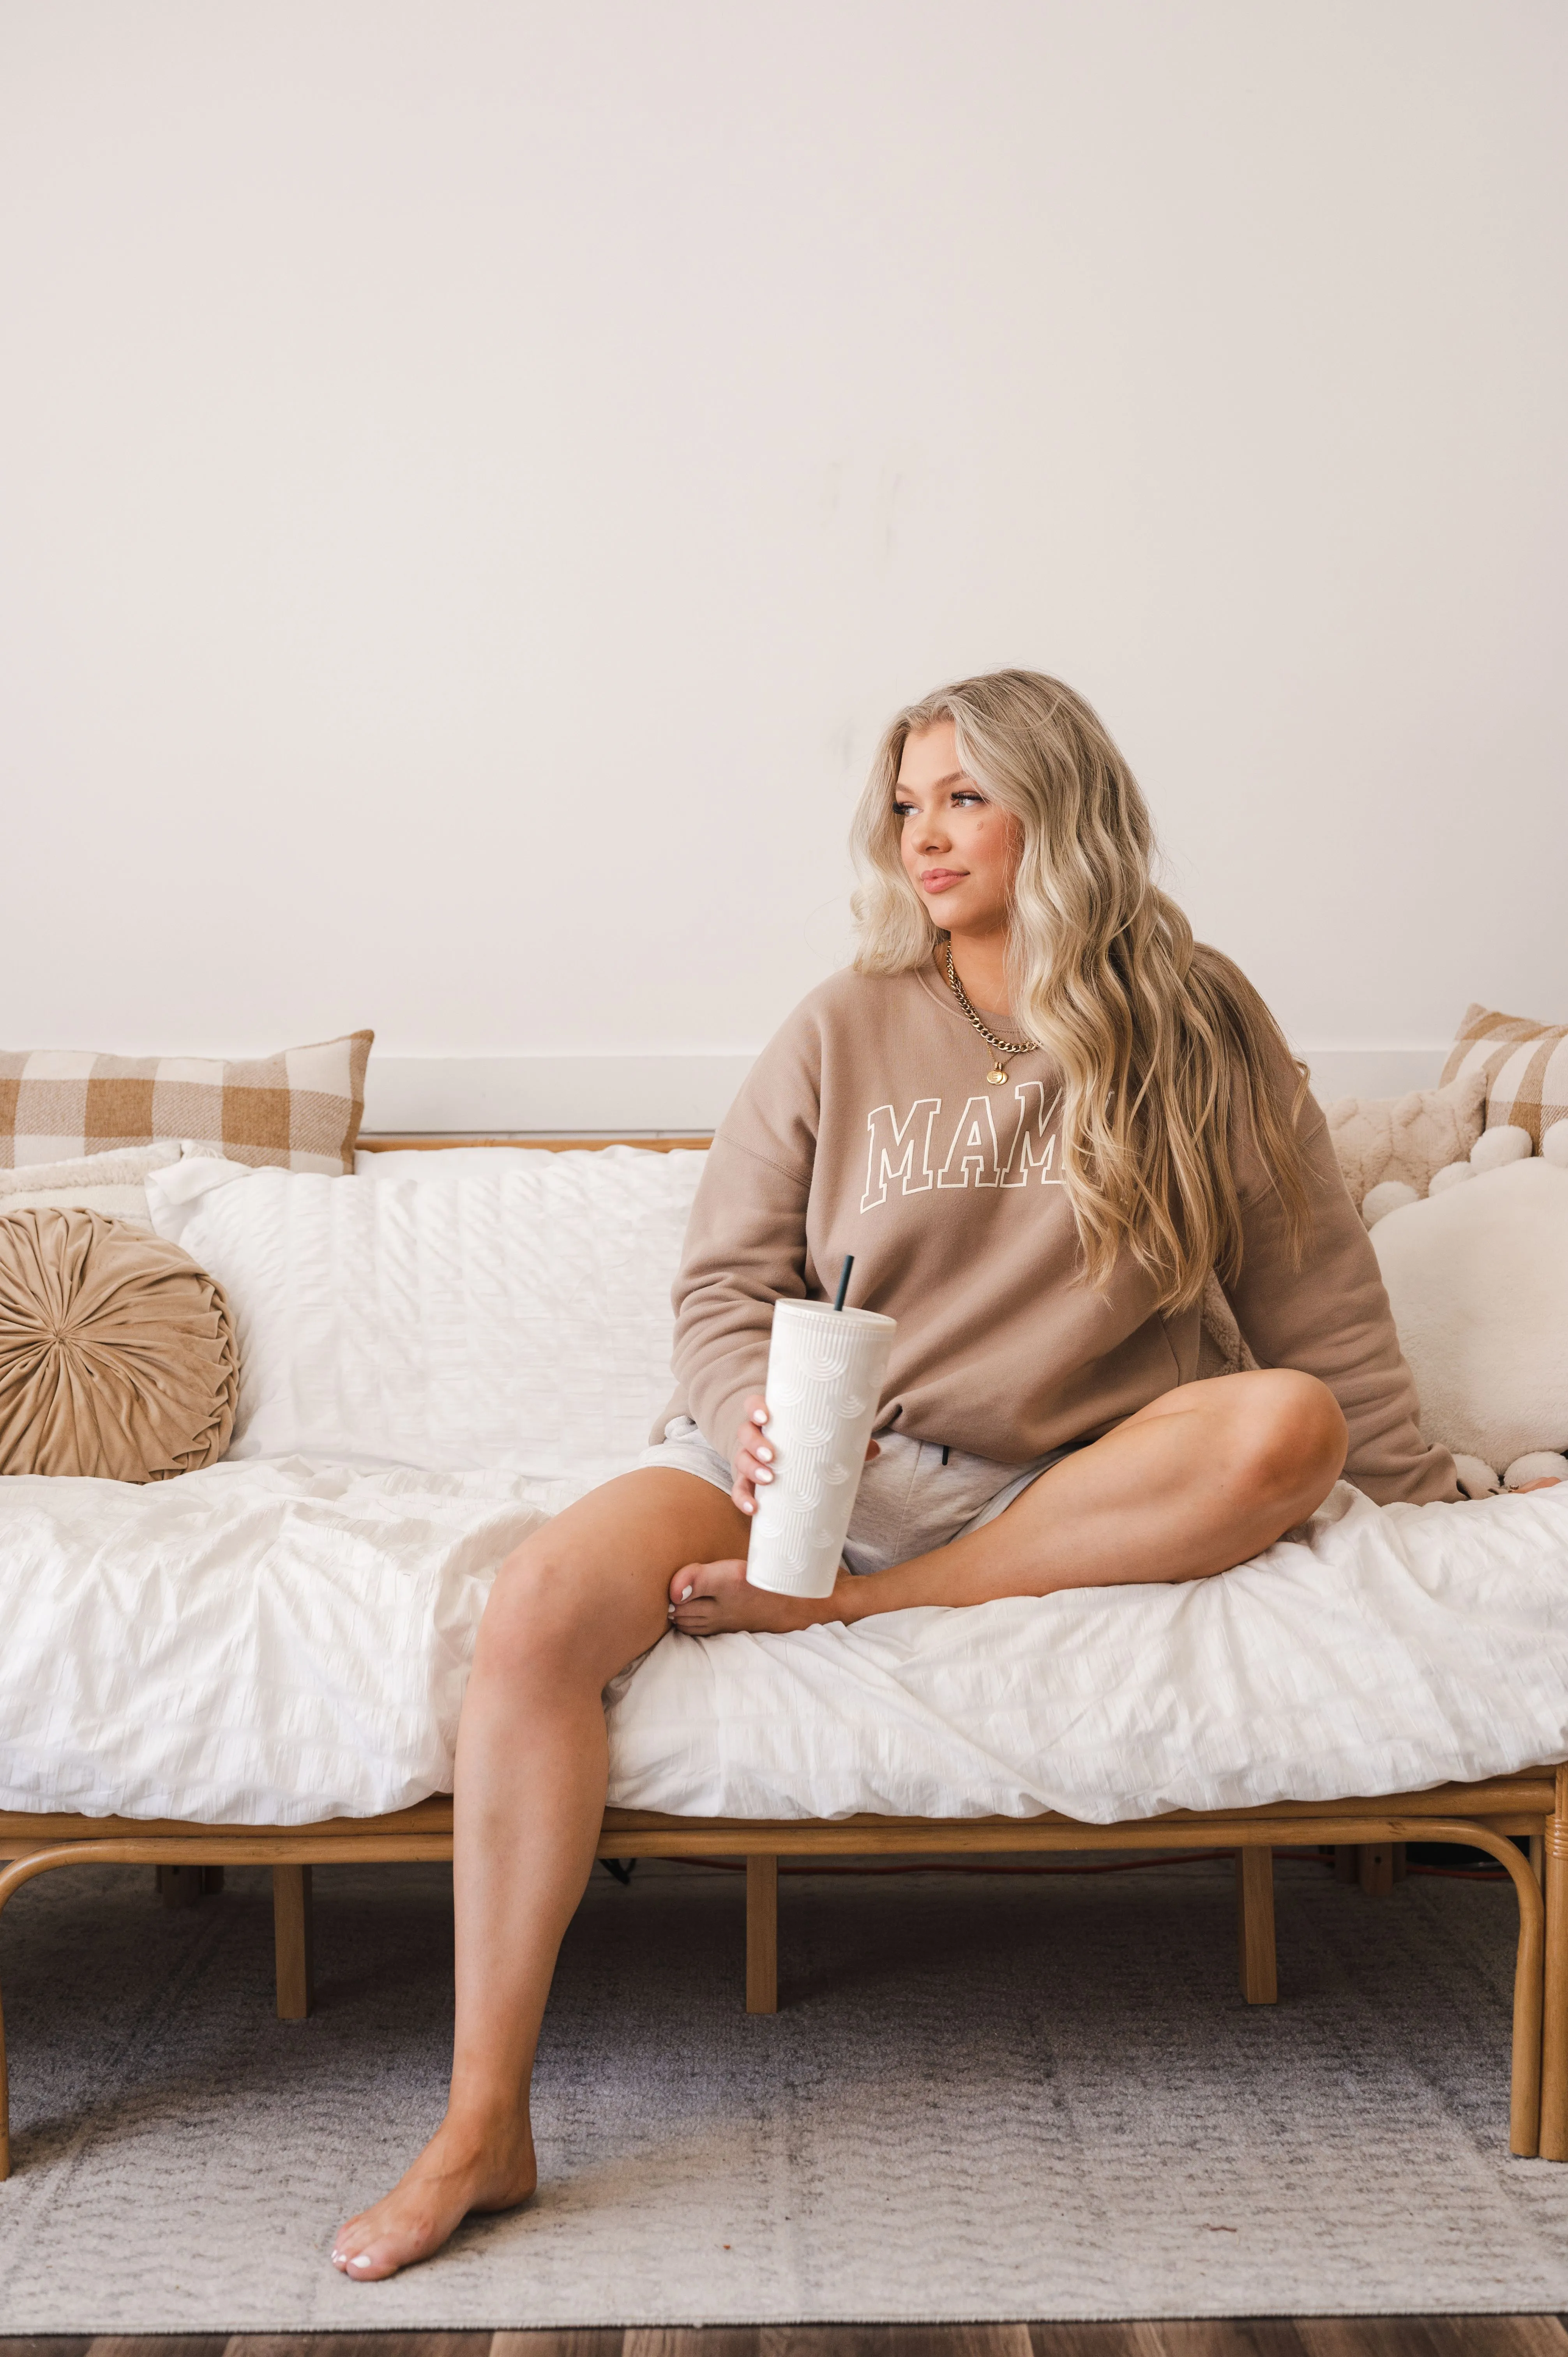 Woman sitting on a bed holding a tumbler, with a serene expression, in a cozy room environment.